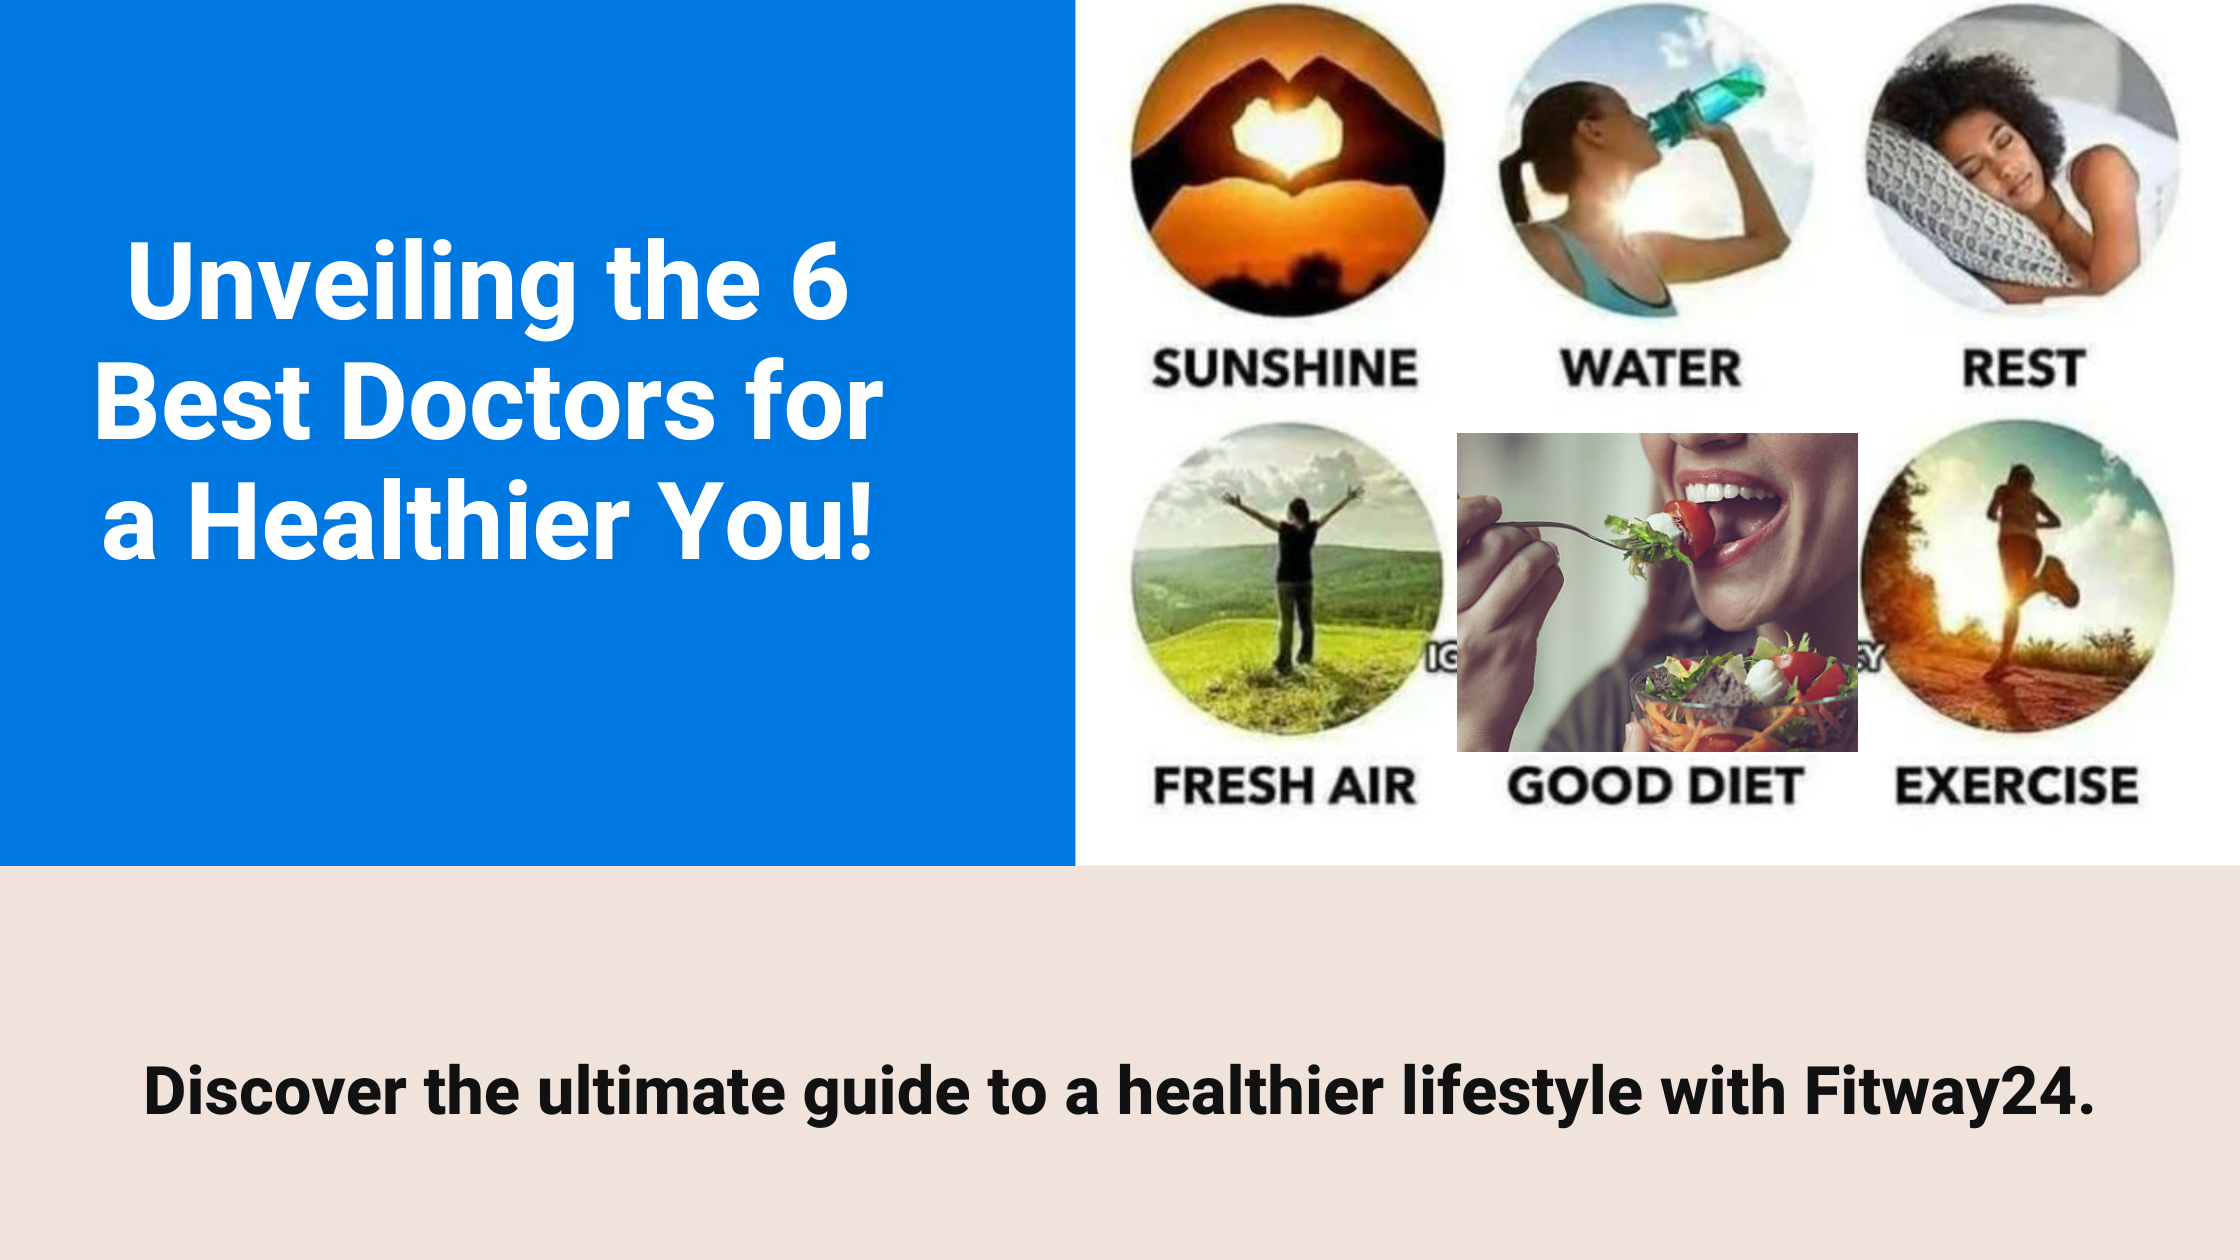 Optimize your health with the best 6 doctors: sunshine, water, rest, fresh air, good diet, and exercise.